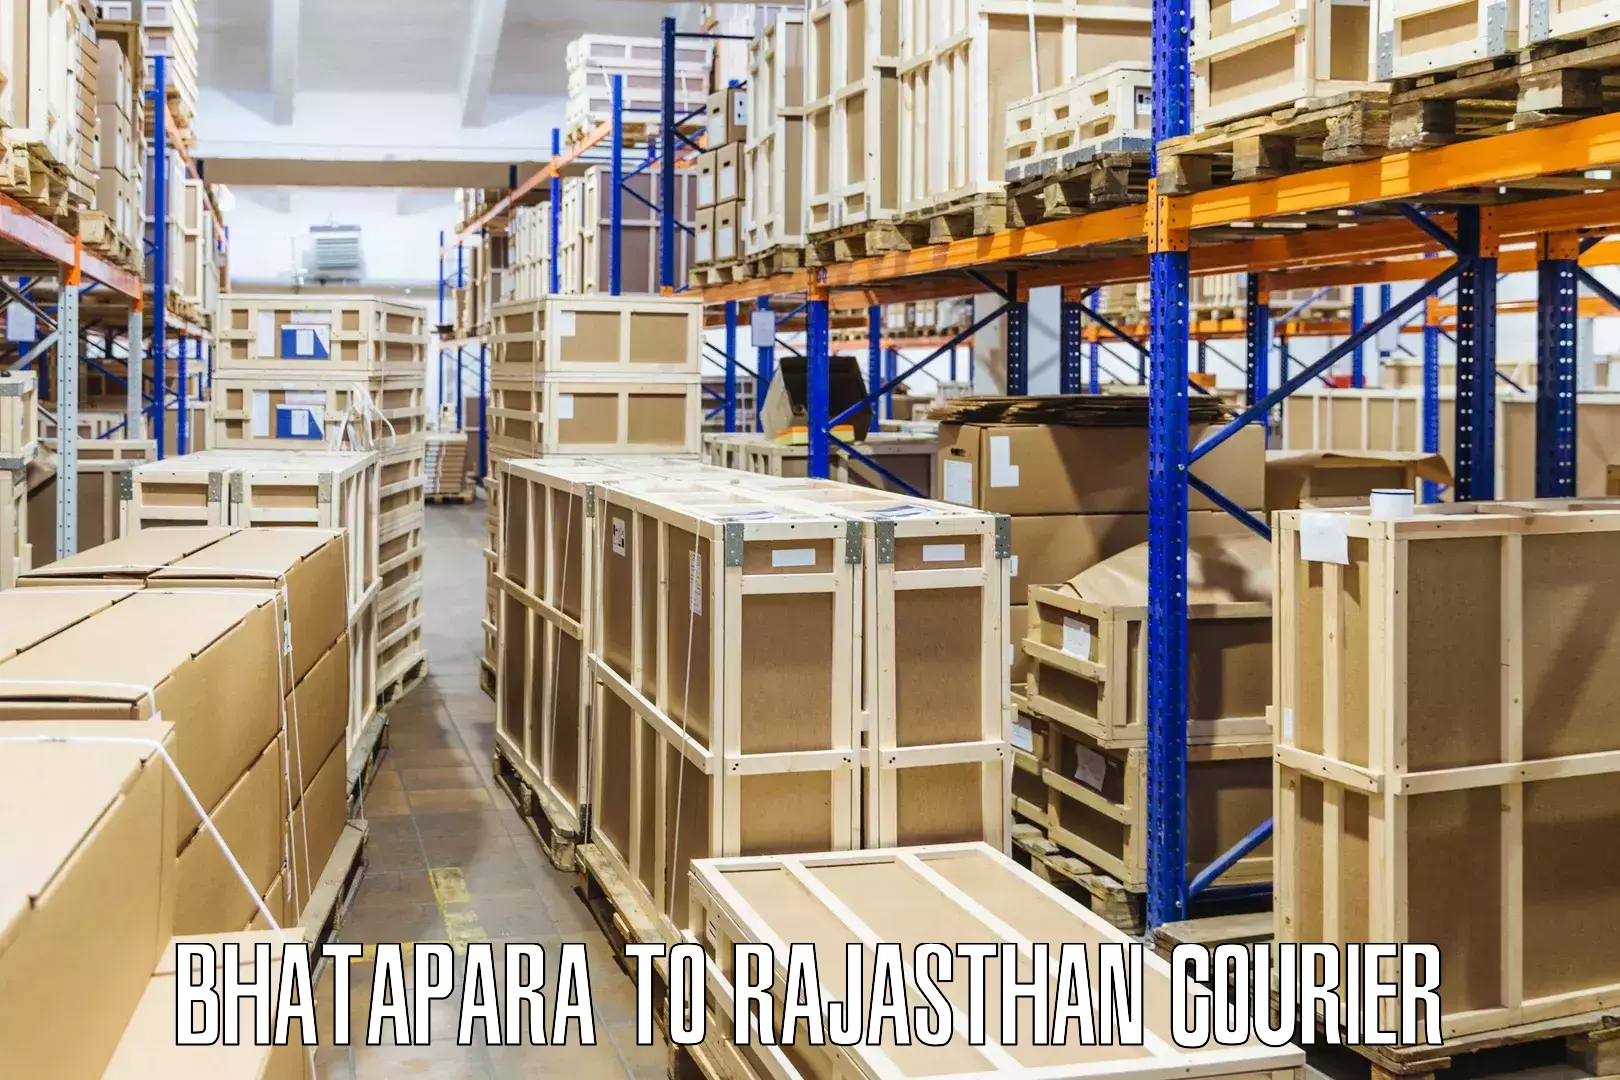 Lightweight parcel options in Bhatapara to Nohar